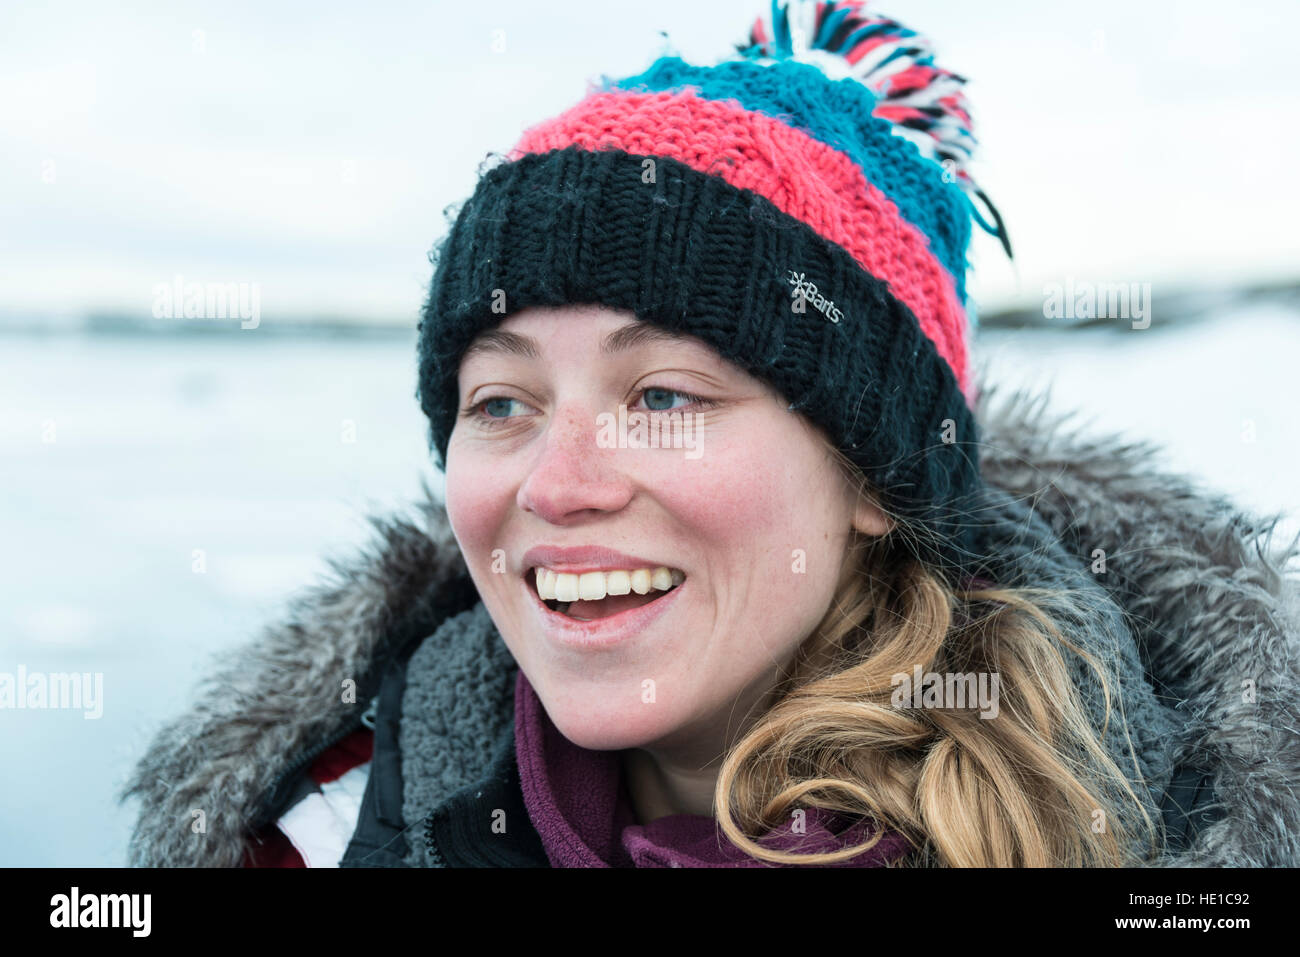 Young woman wearing woolly hat, laughing, portrait, Fjallsárlón Glacier Lagoon, Iceland Stock Photo